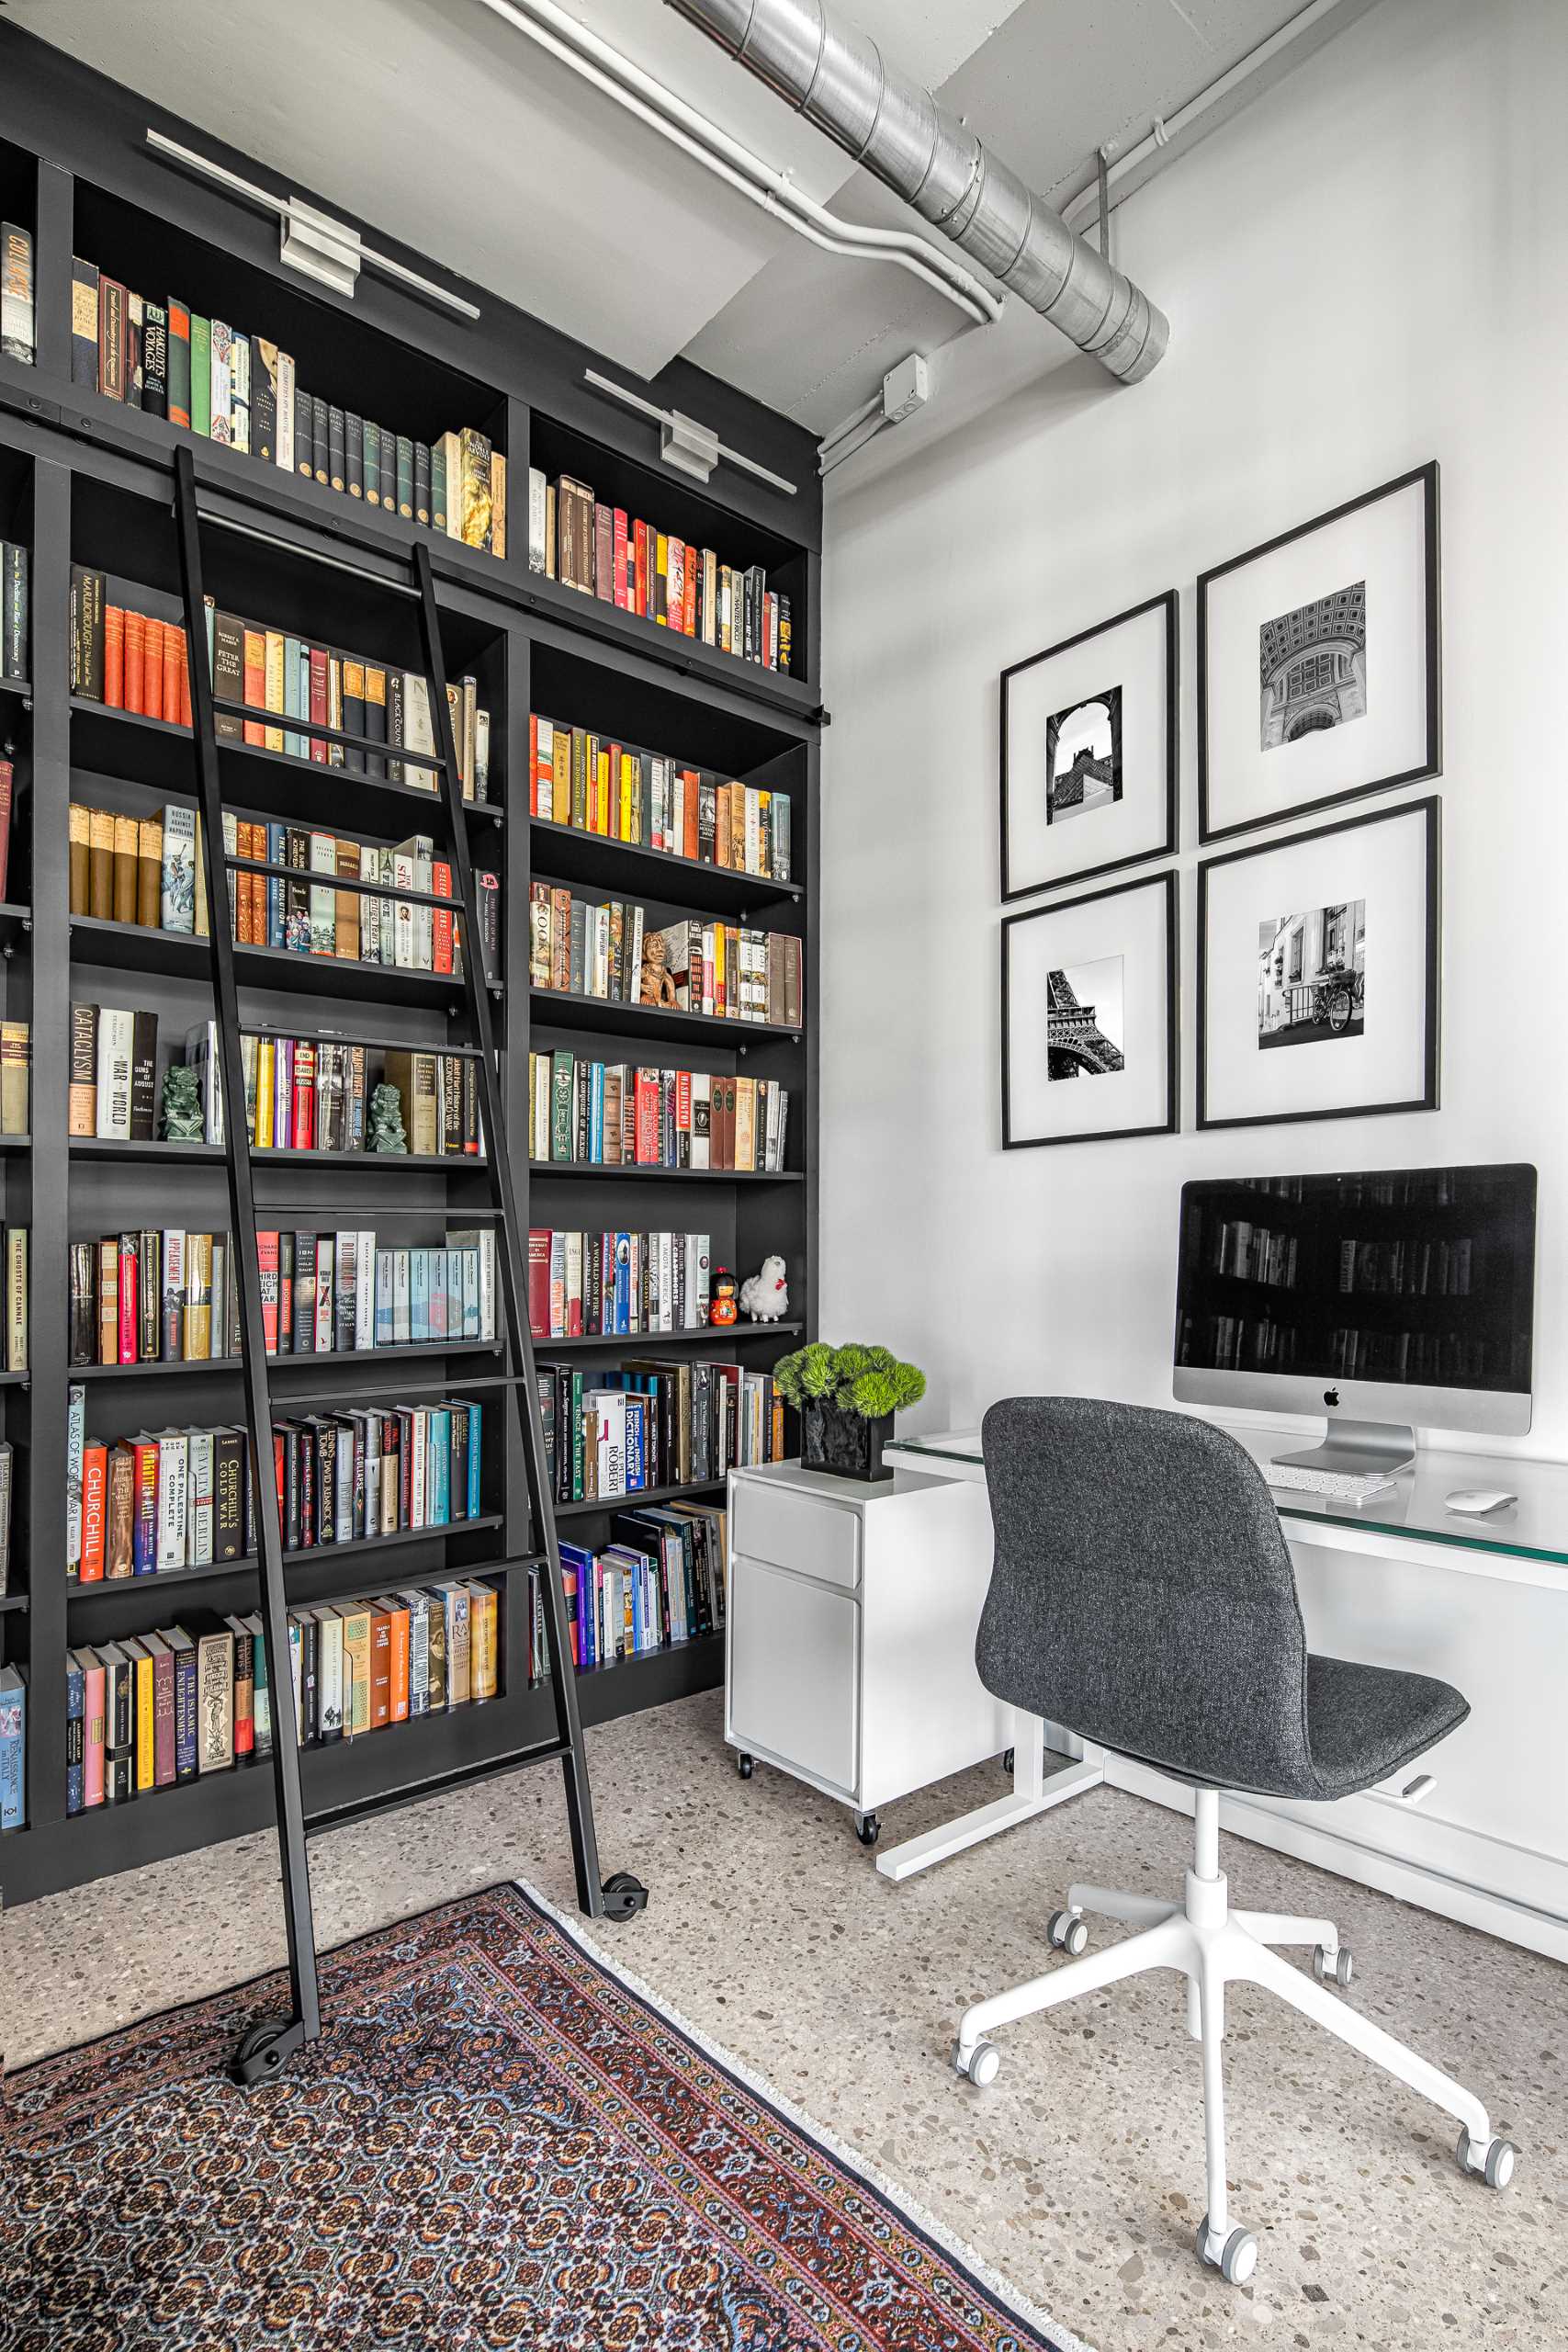 The home office in a library is positioned against an empty wall, and has art with black frames to match the shelving.